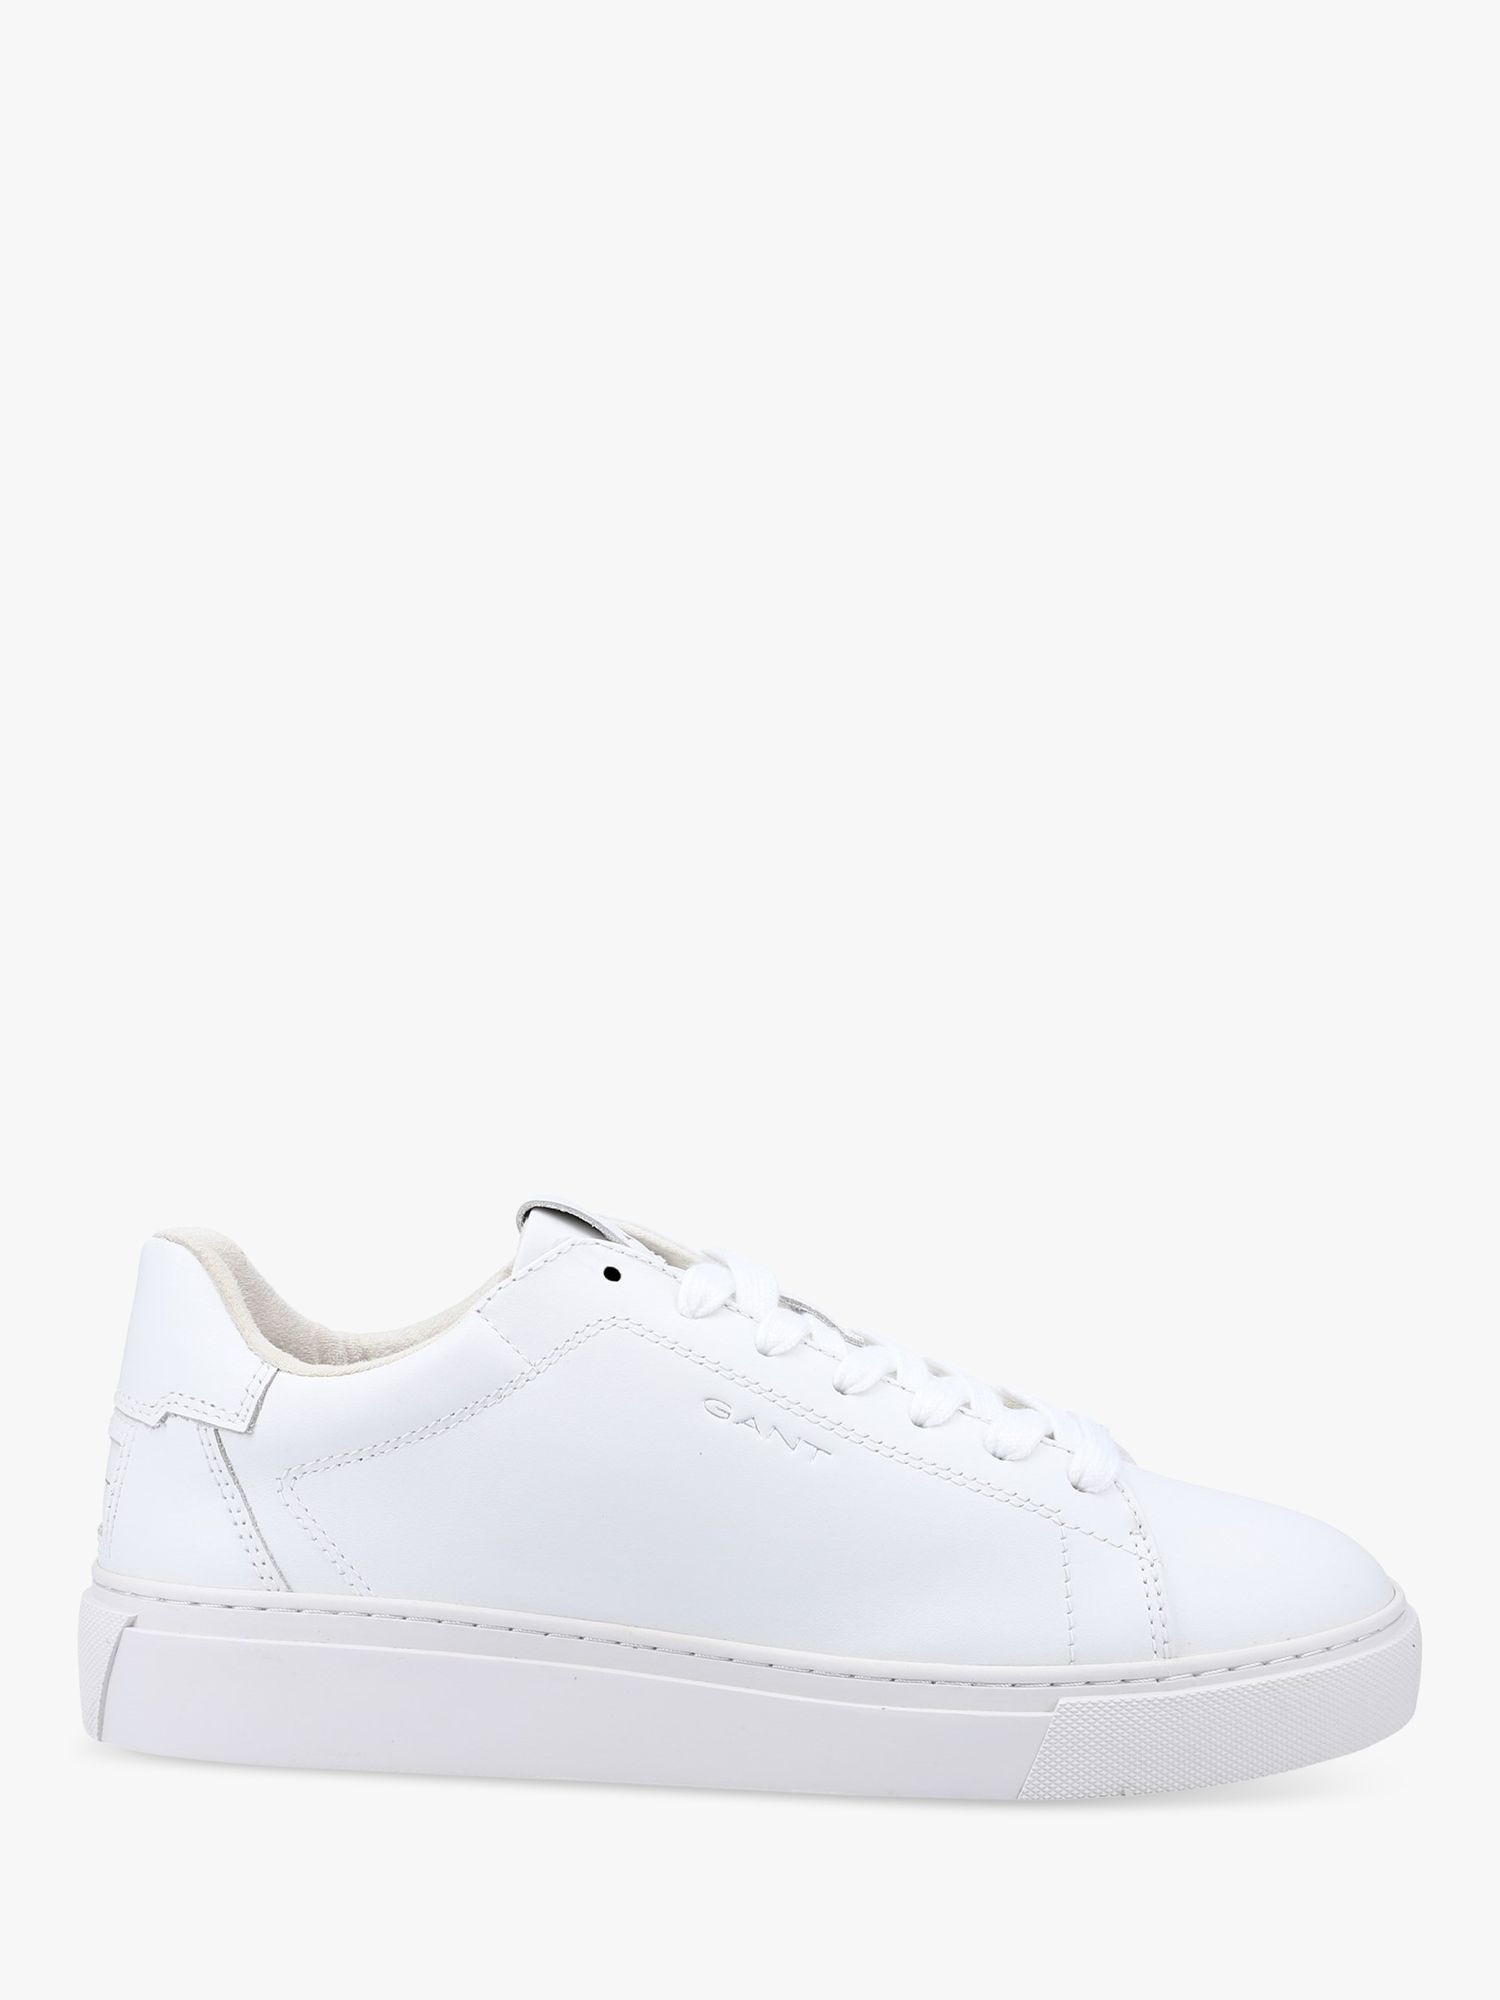 GANT Mc Julien Leather Low Top Tennis Trainers, White at John Lewis ...